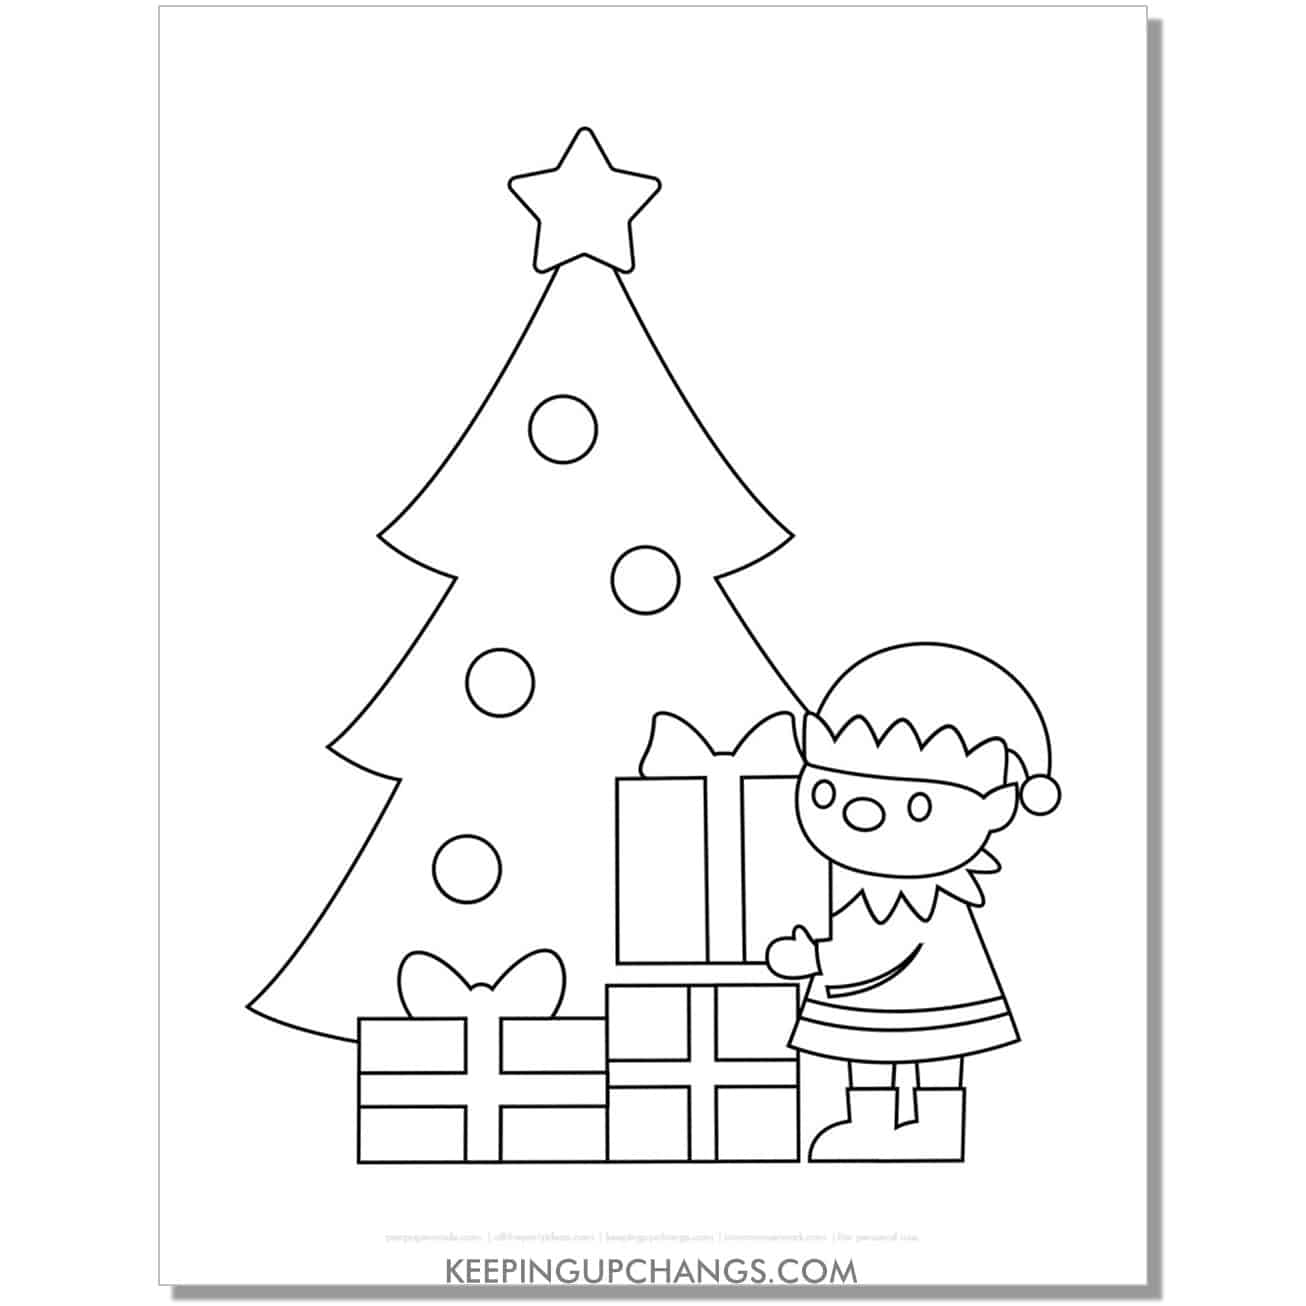 free elf putting presents under tree coloring page for toddlers.